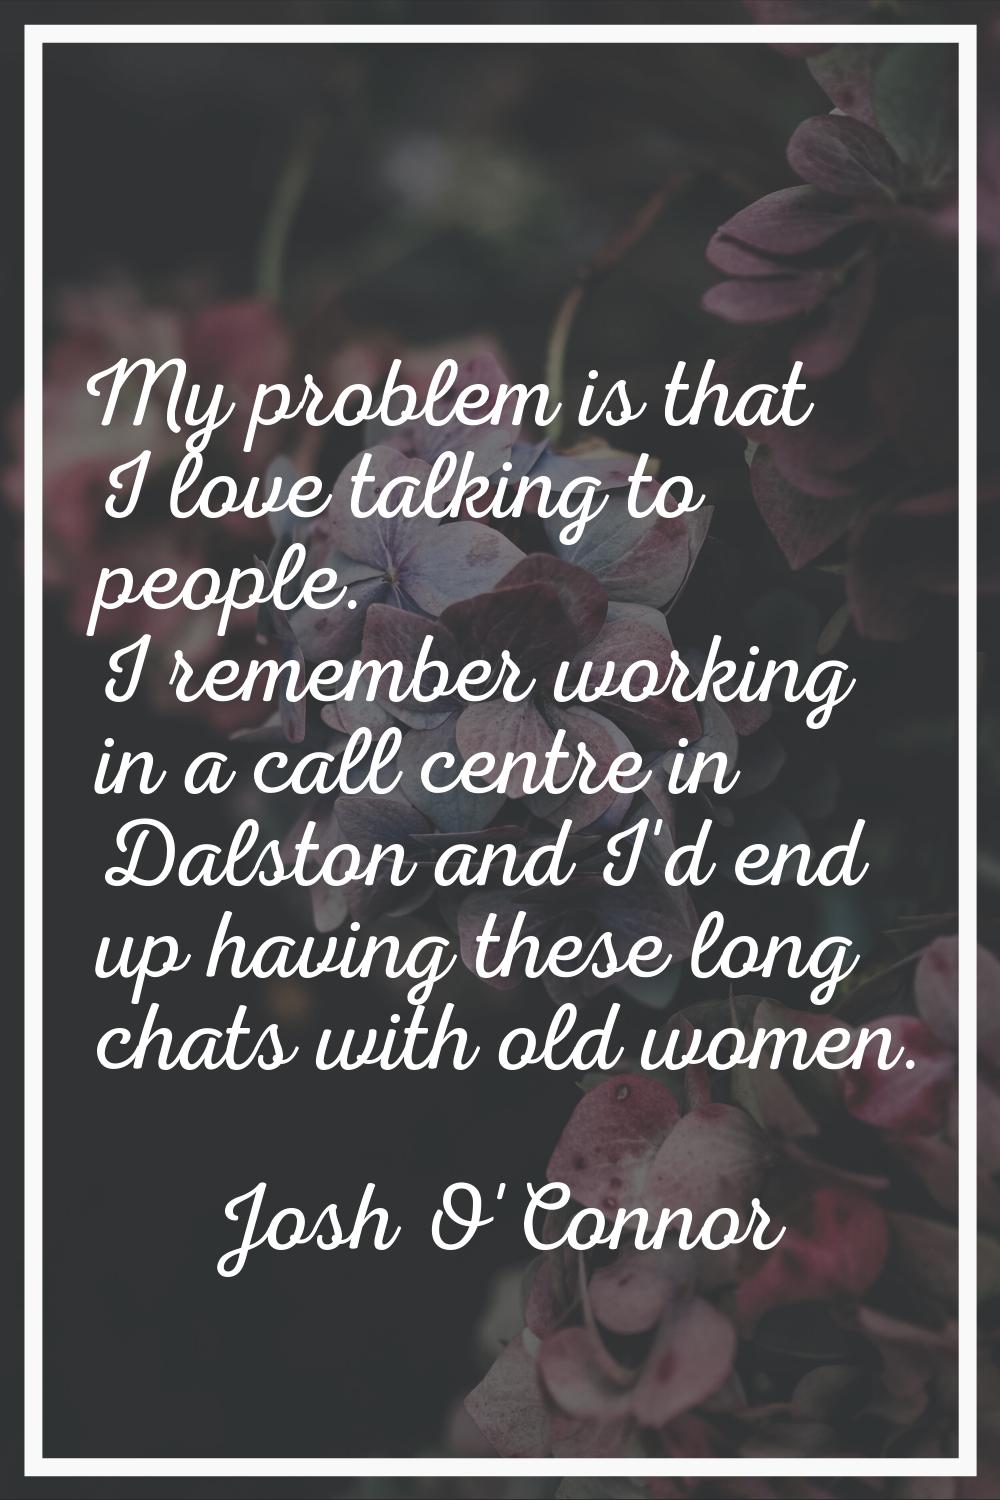 My problem is that I love talking to people. I remember working in a call centre in Dalston and I'd